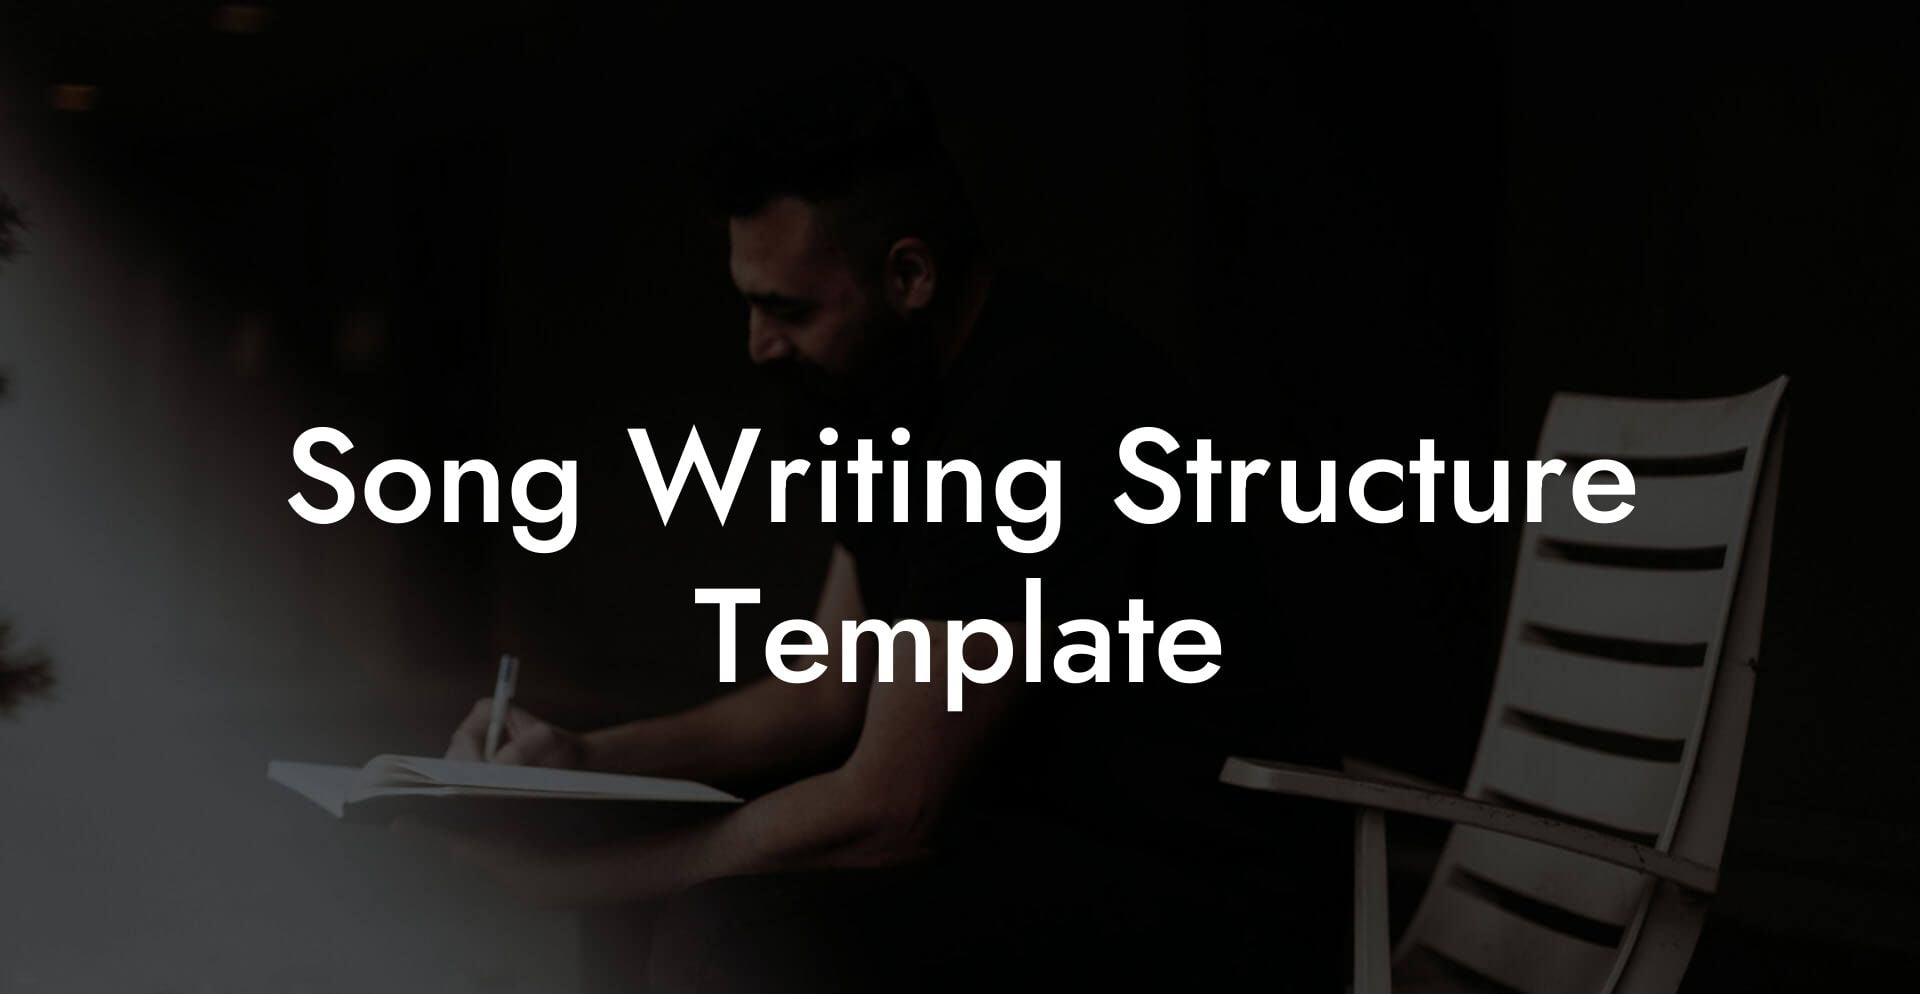 song writing structure template lyric assistant